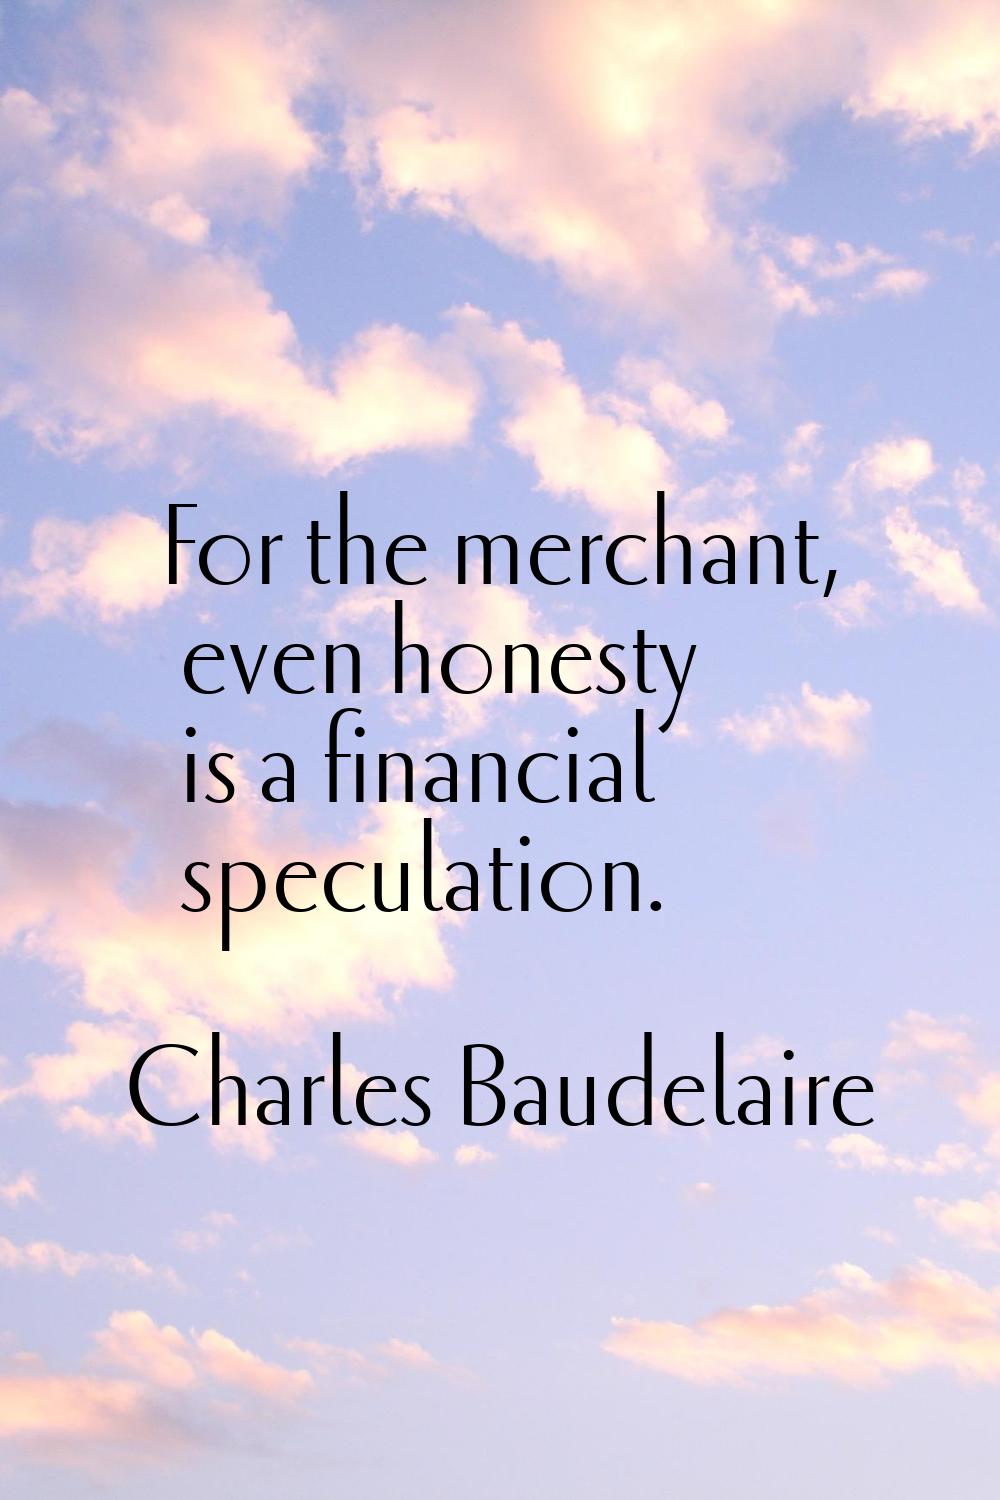 For the merchant, even honesty is a financial speculation.